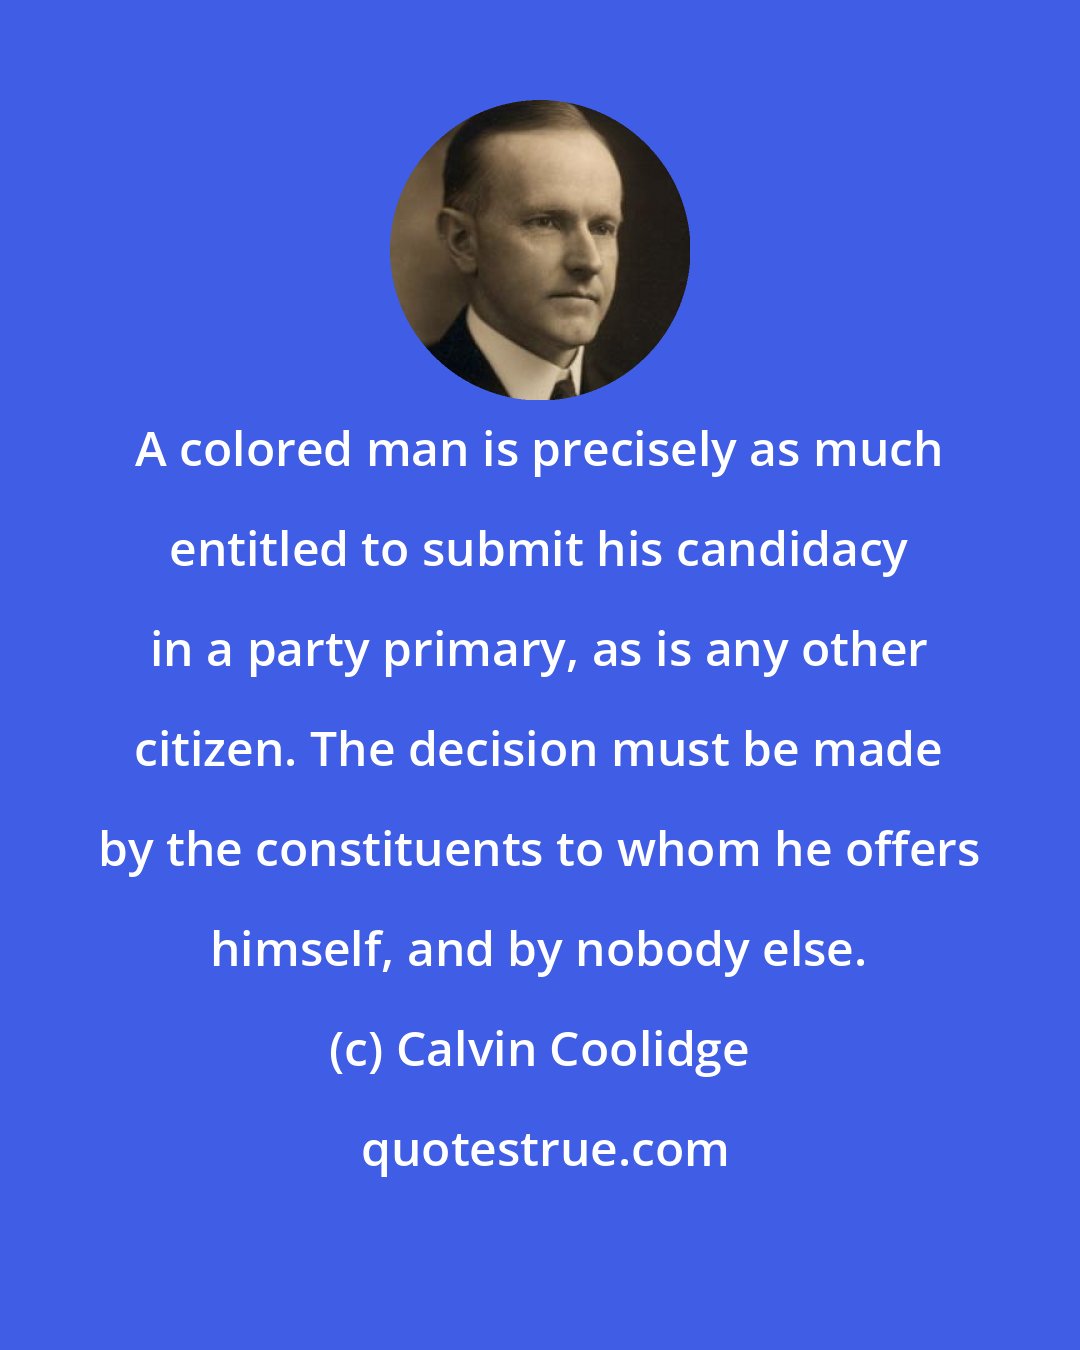 Calvin Coolidge: A colored man is precisely as much entitled to submit his candidacy in a party primary, as is any other citizen. The decision must be made by the constituents to whom he offers himself, and by nobody else.